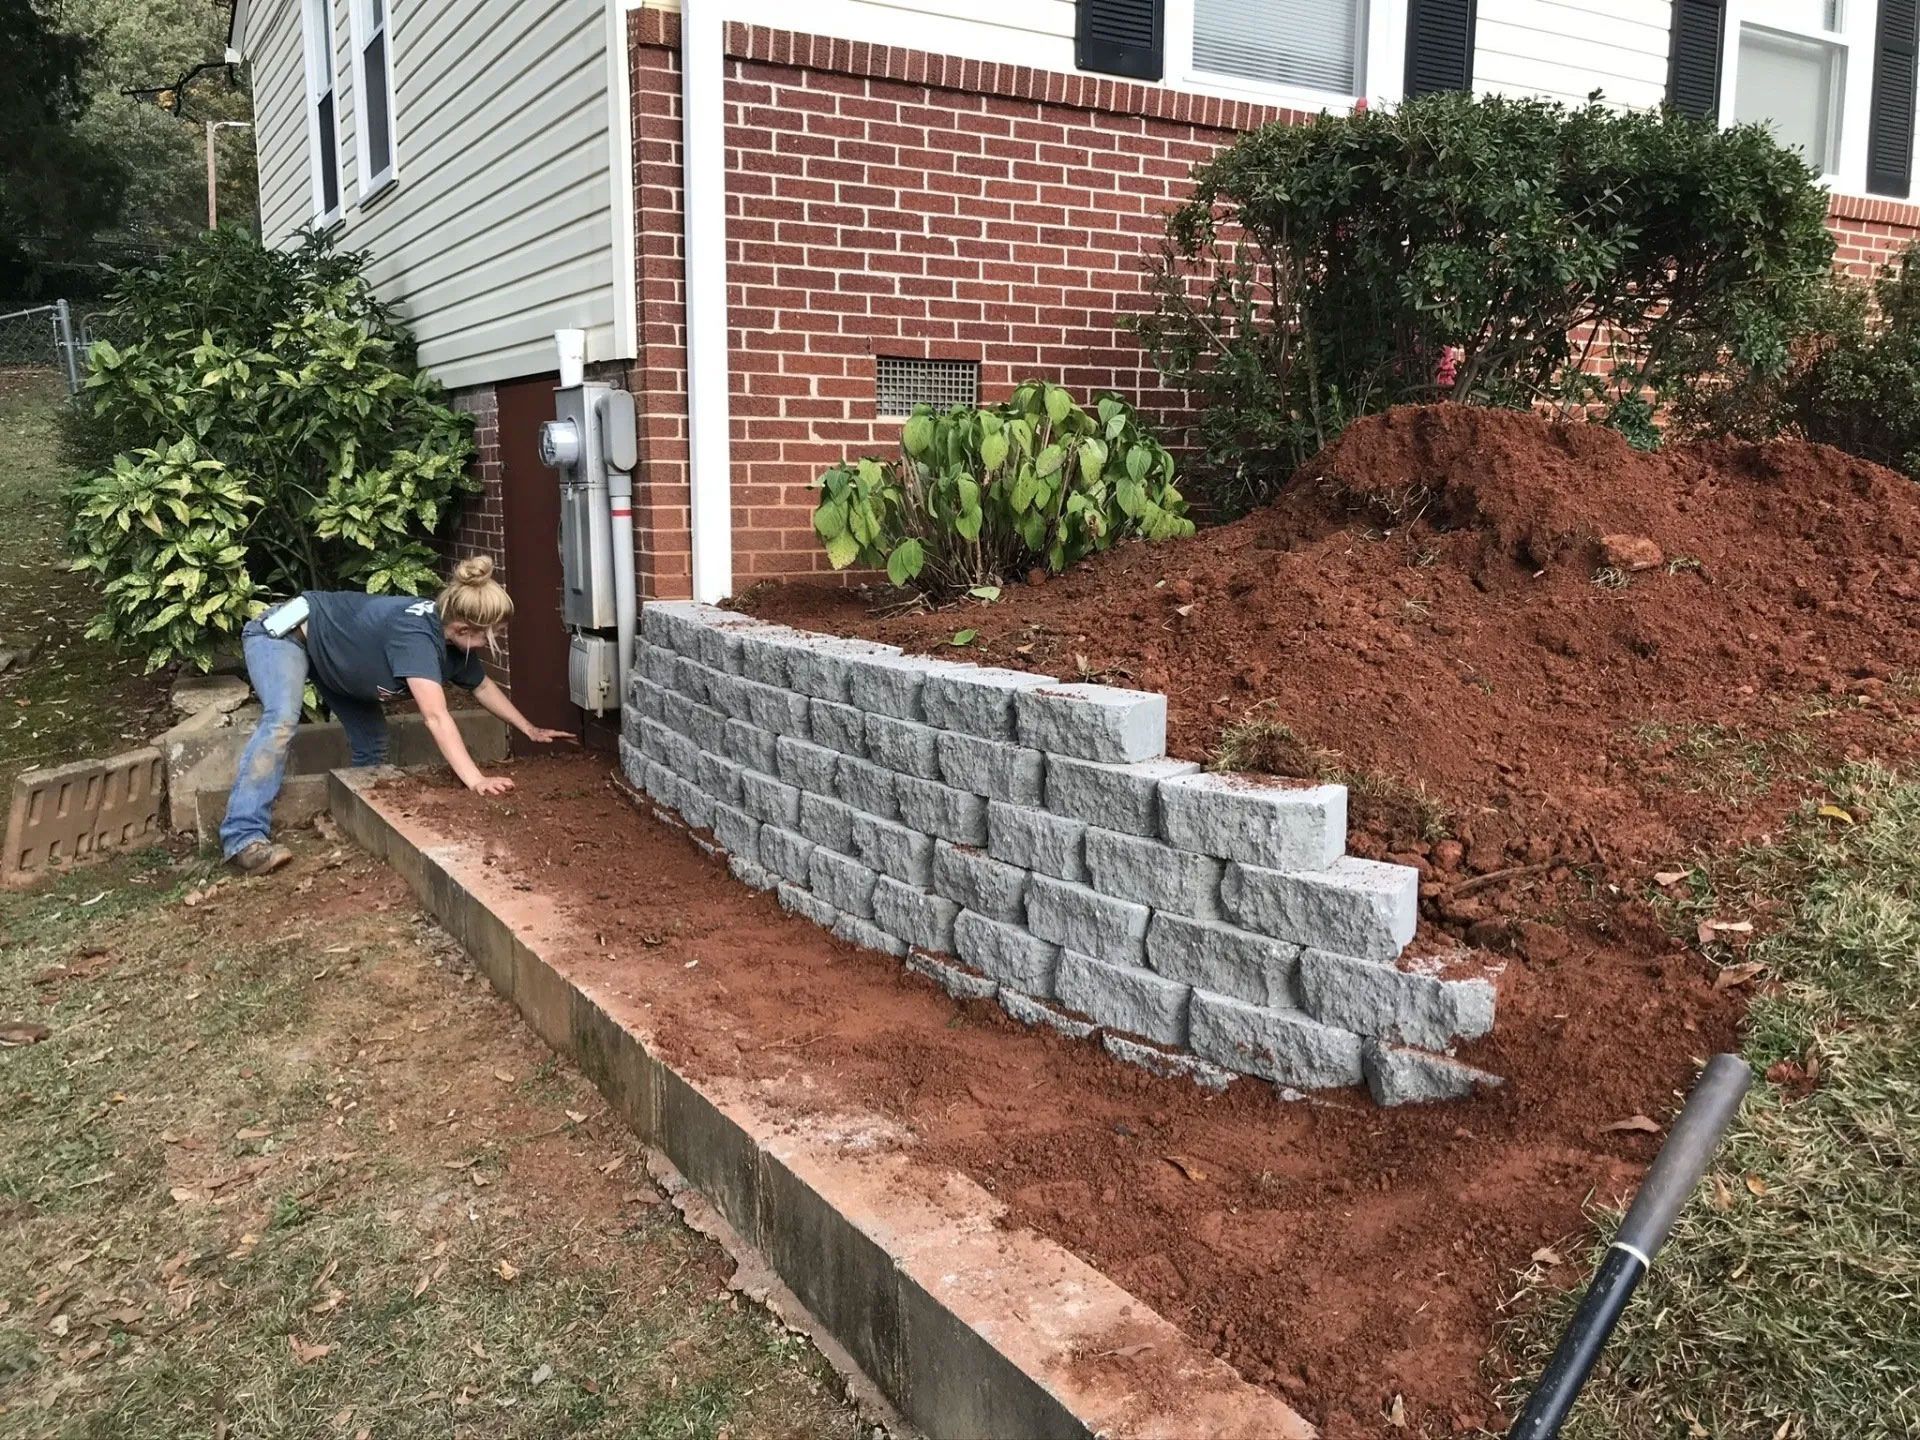 The Benefits of Adding a Retaining Wall to Your Yard